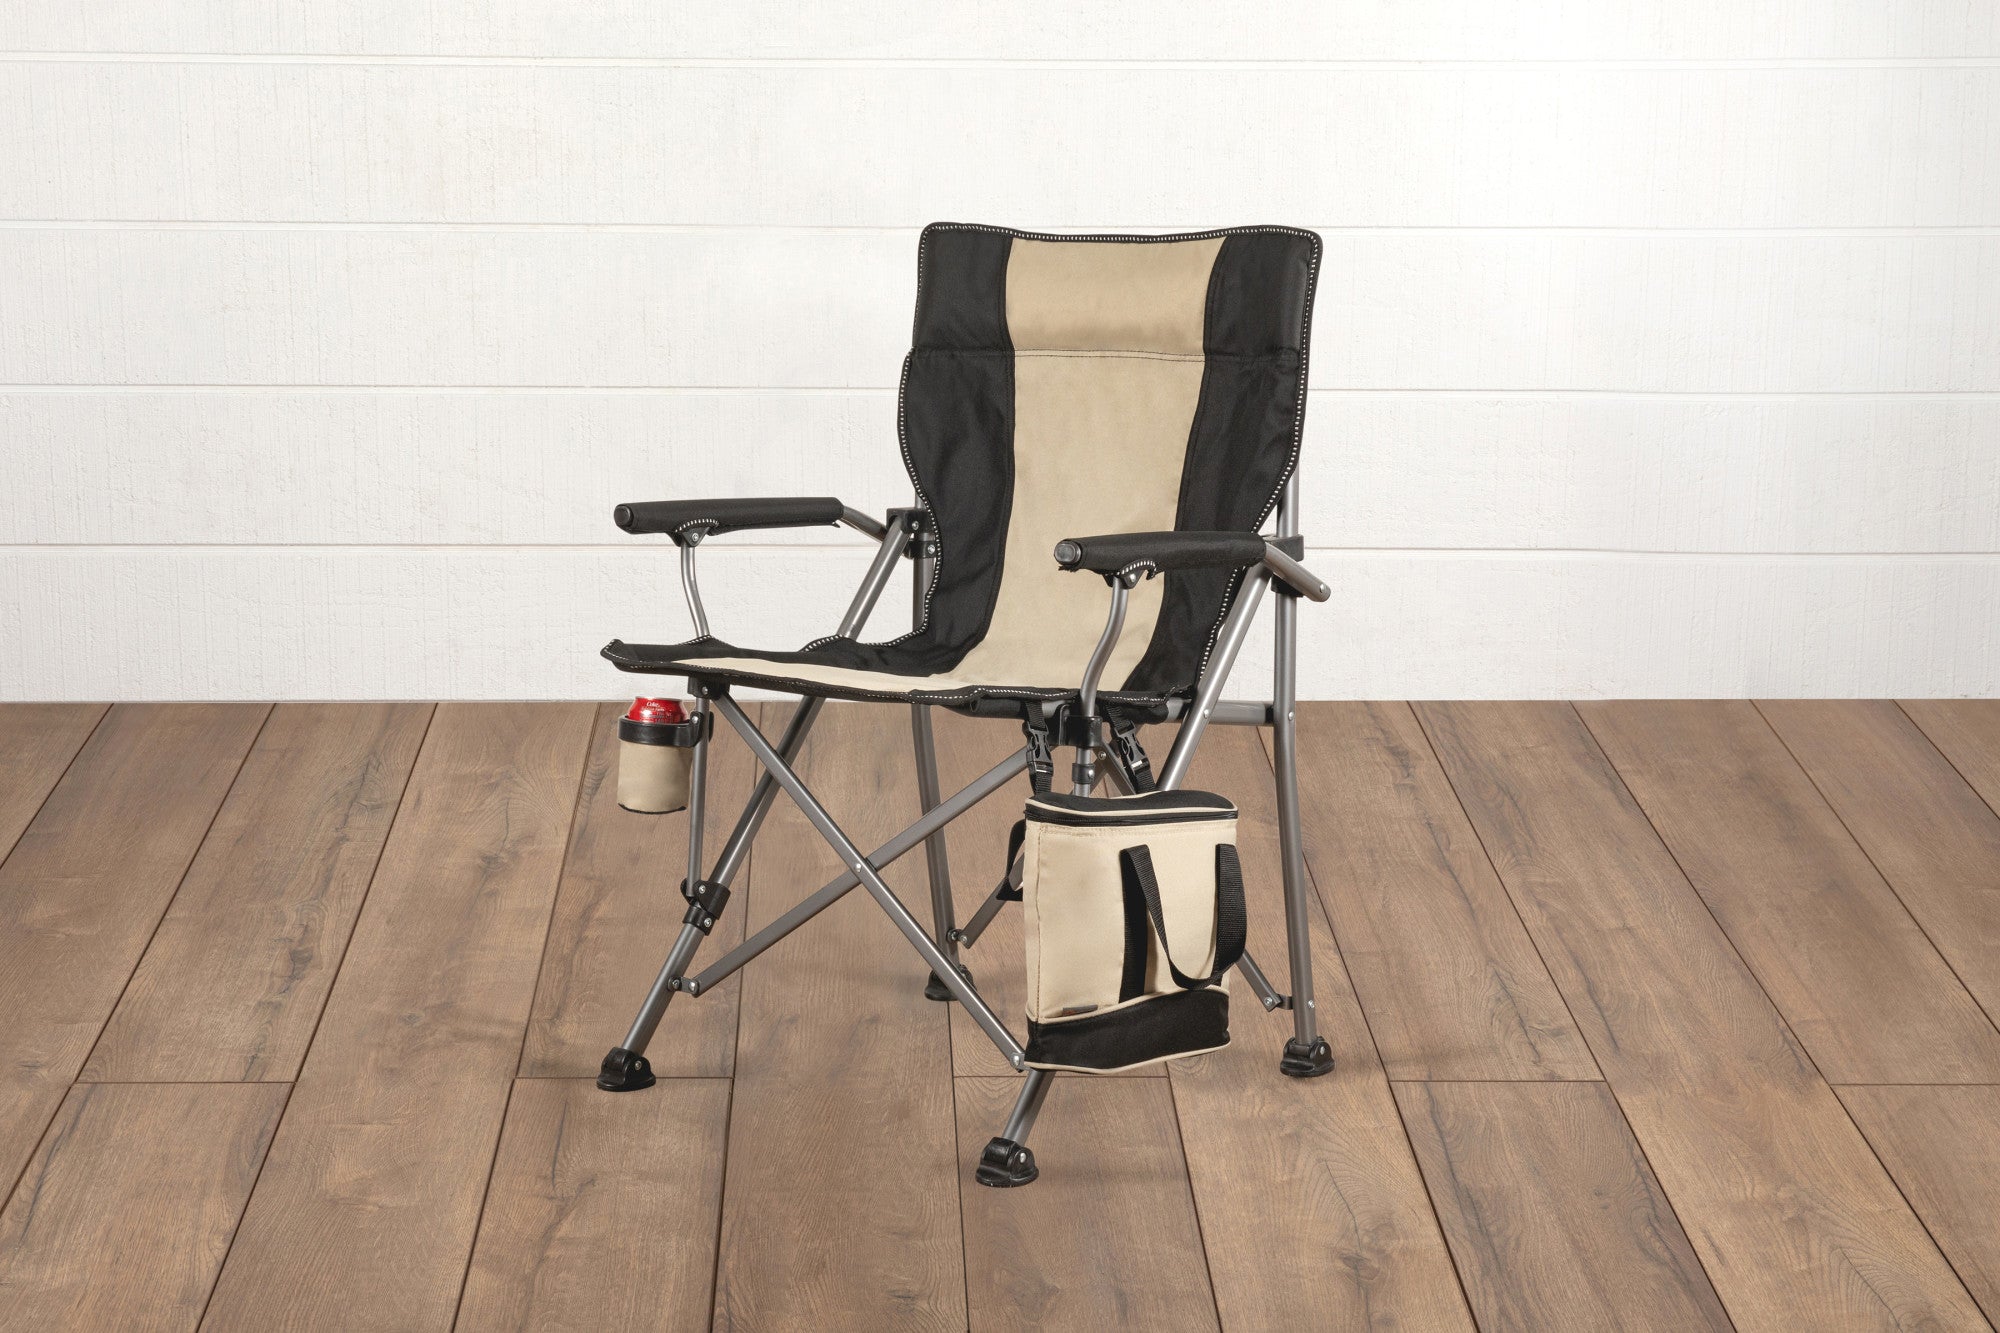 Houston Texans - Outlander XL Camping Chair with Cooler